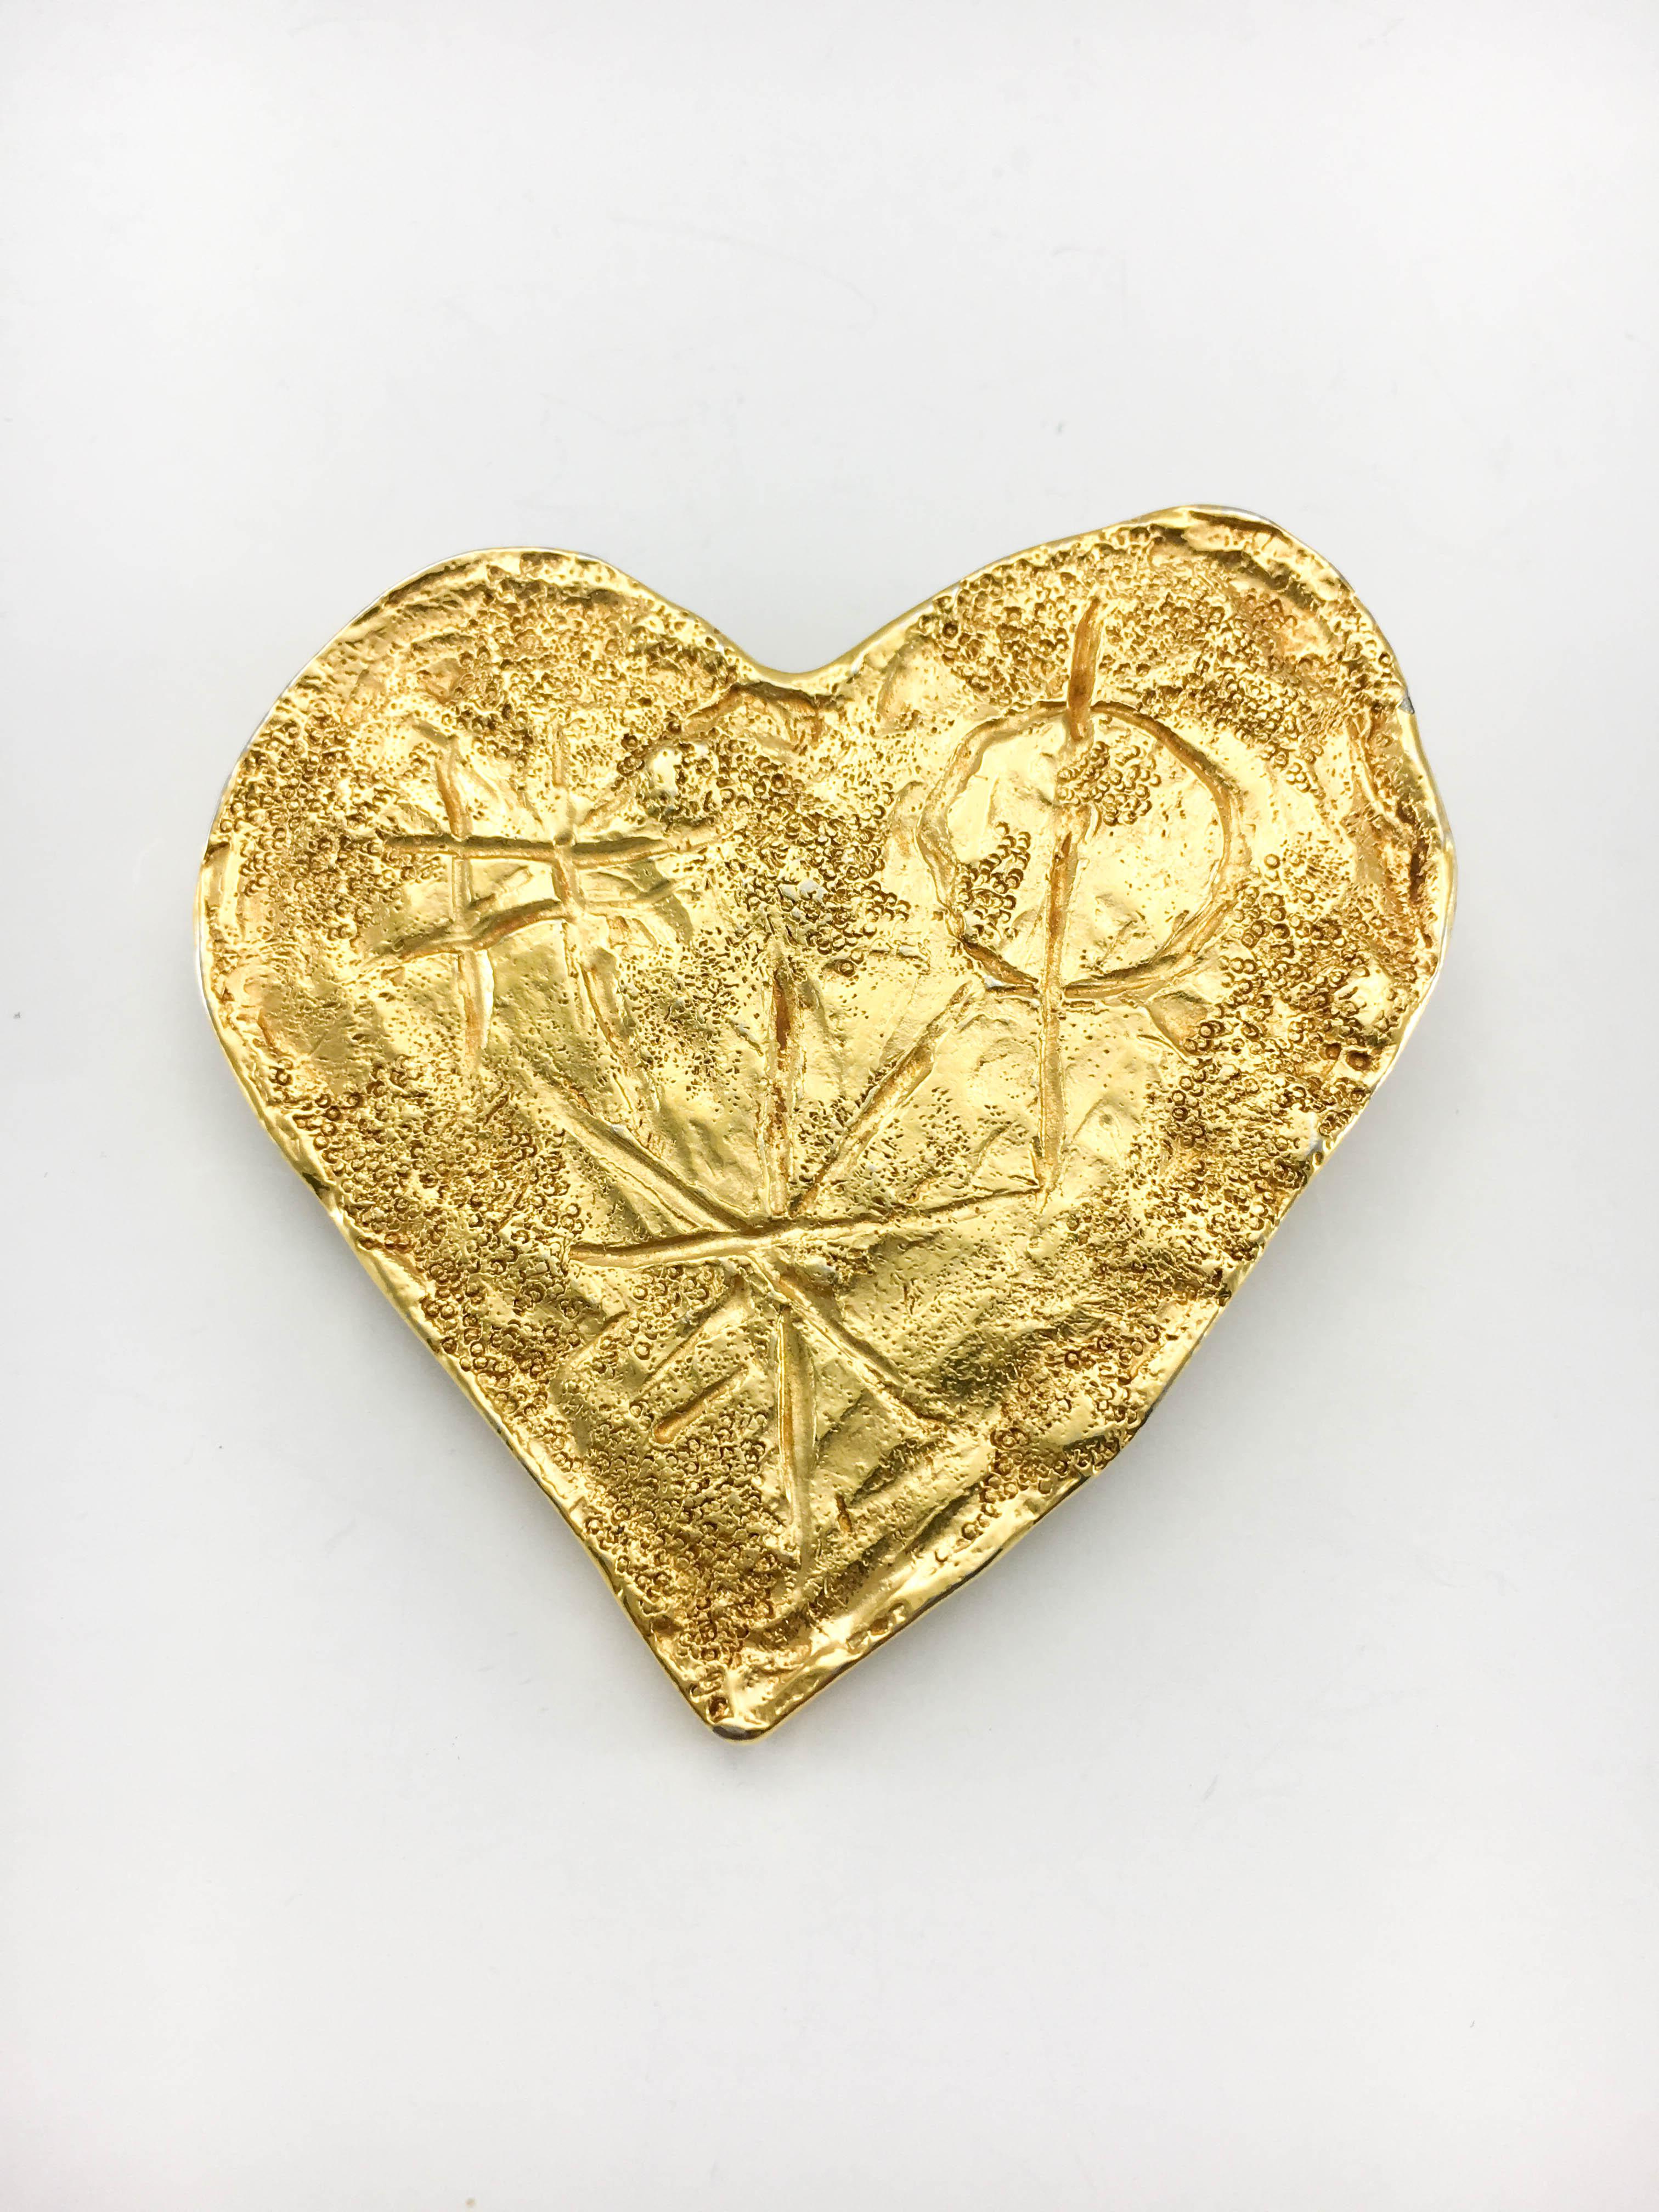 Women's 1994 Lacroix Gold-Plated Modernist Heart Brooch, by Goossens For Sale